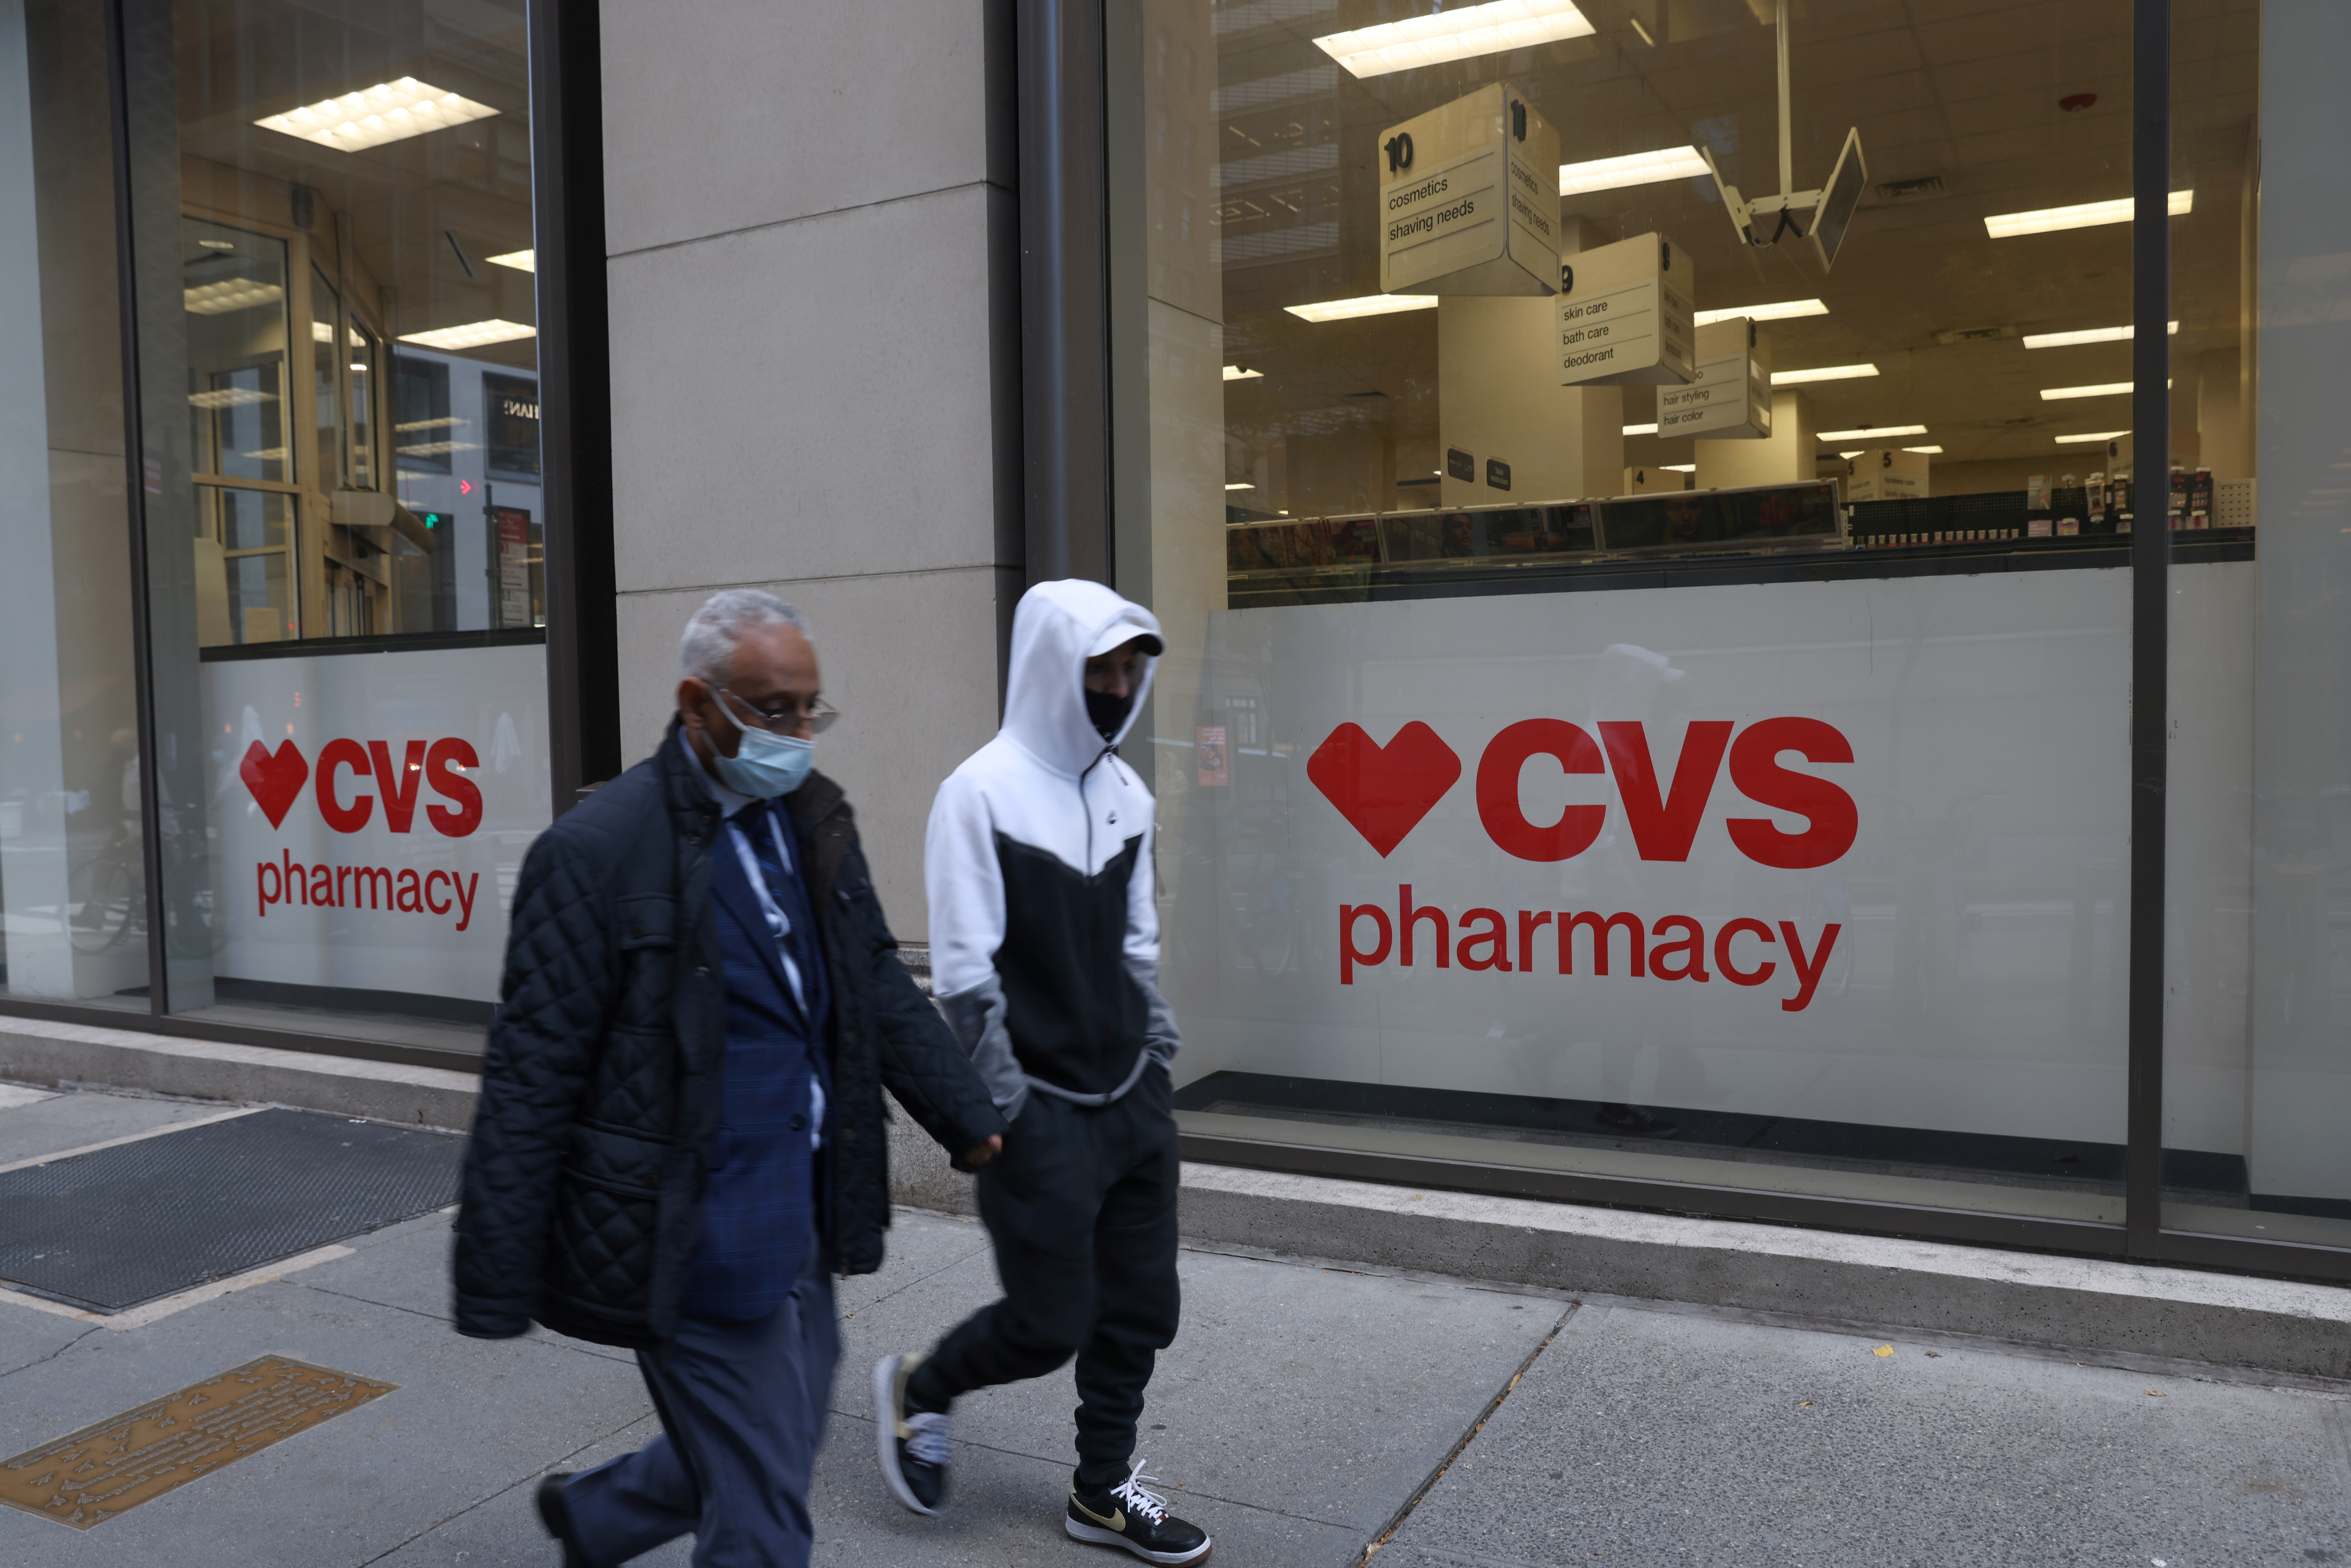 People walk by a CVS pharmacy store in Manhattan, New York